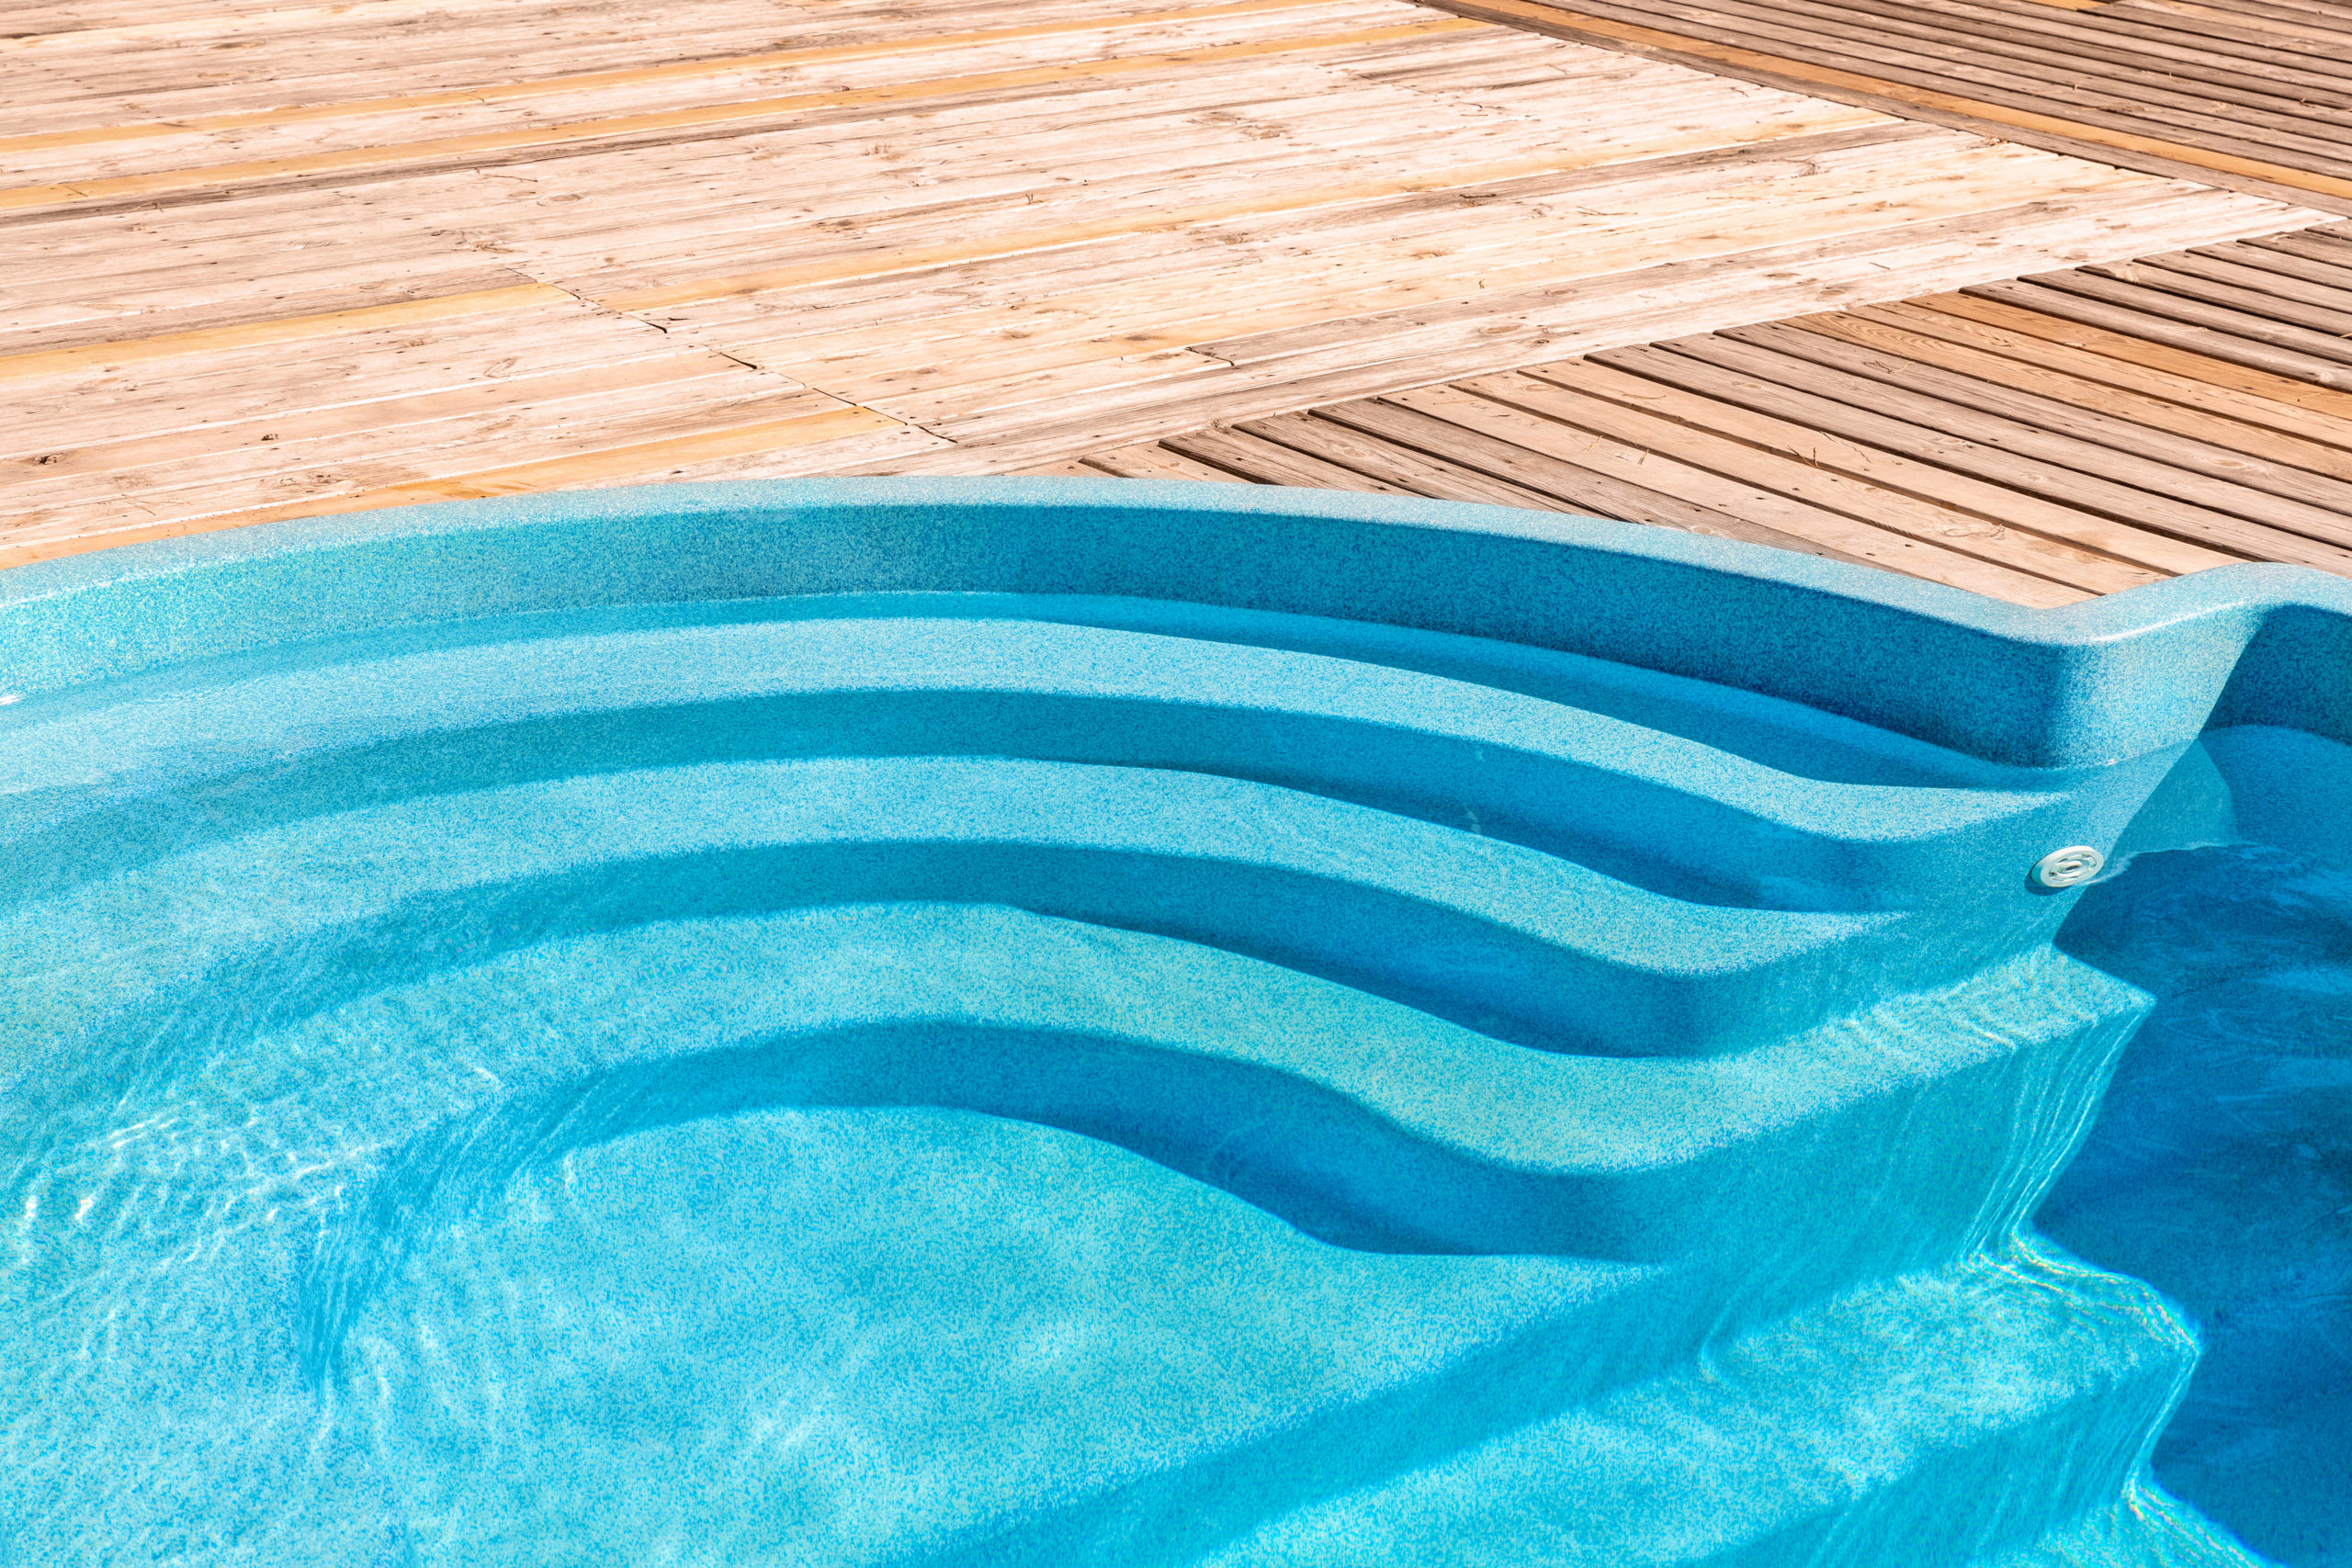 Swimming pool with an insulated surface, designed to minimize heat loss and improve energy efficiency